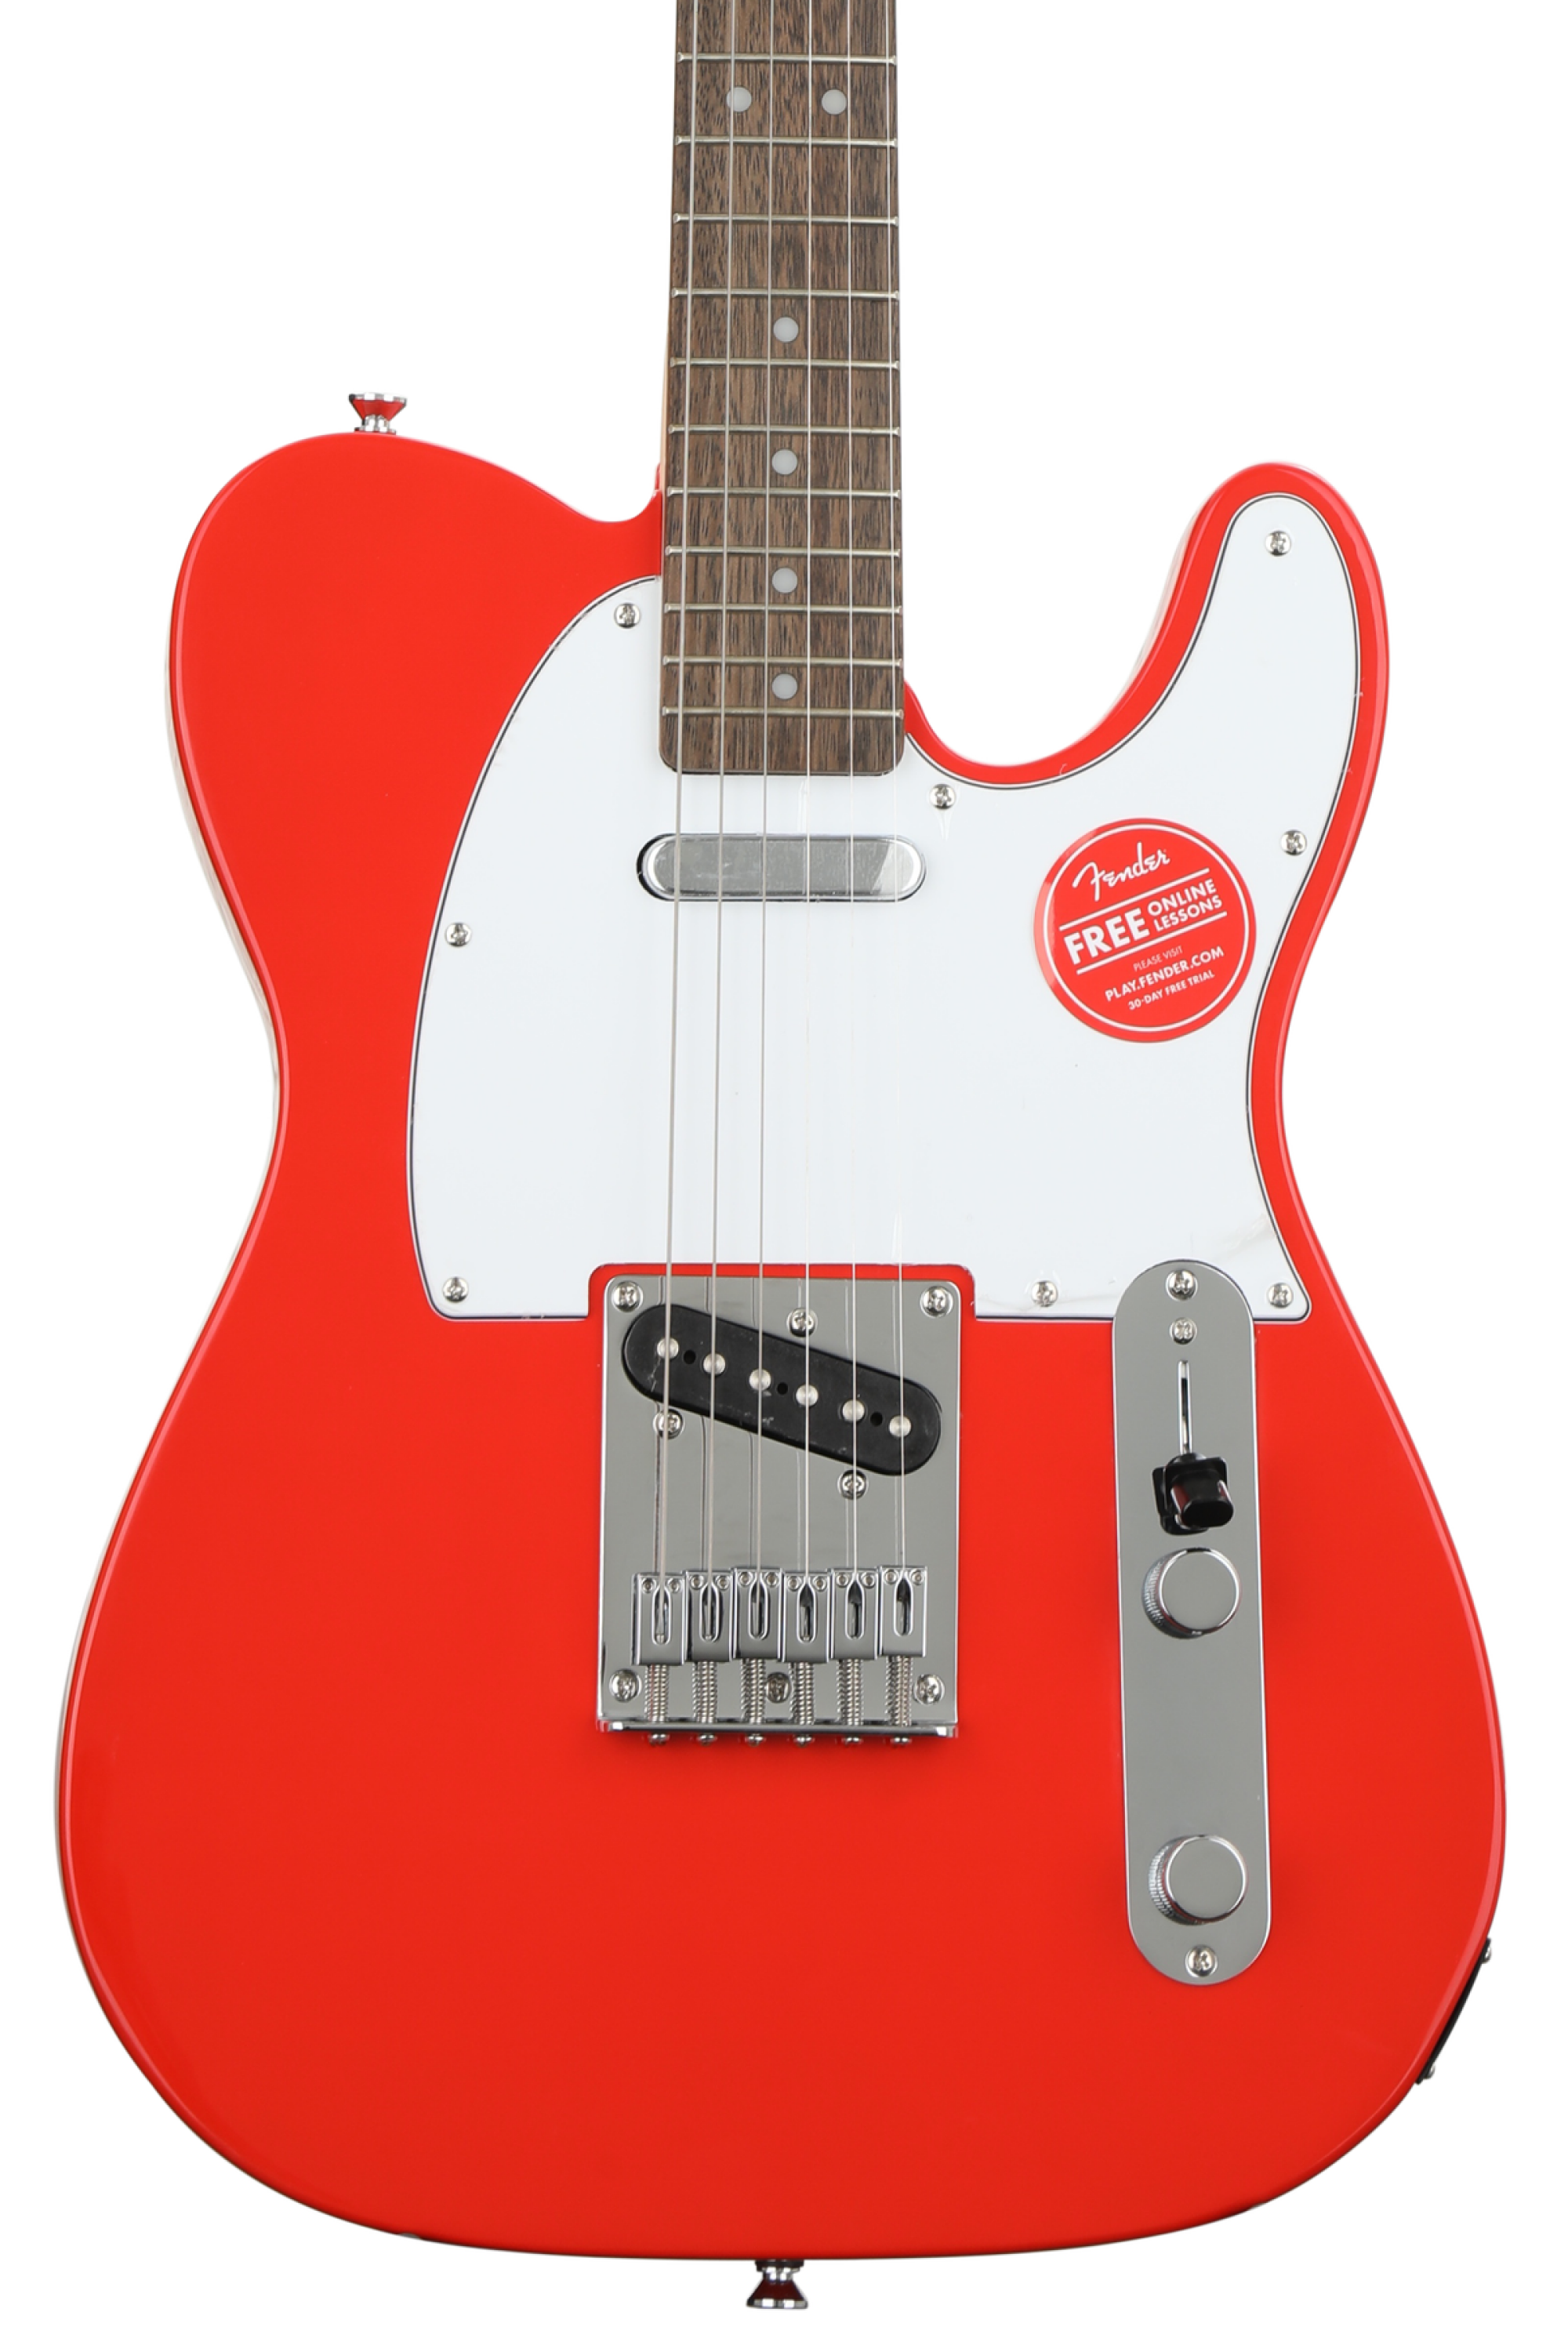 Squier Affinity Series Telecaster - Race Red with Indian Laurel Fingerboard